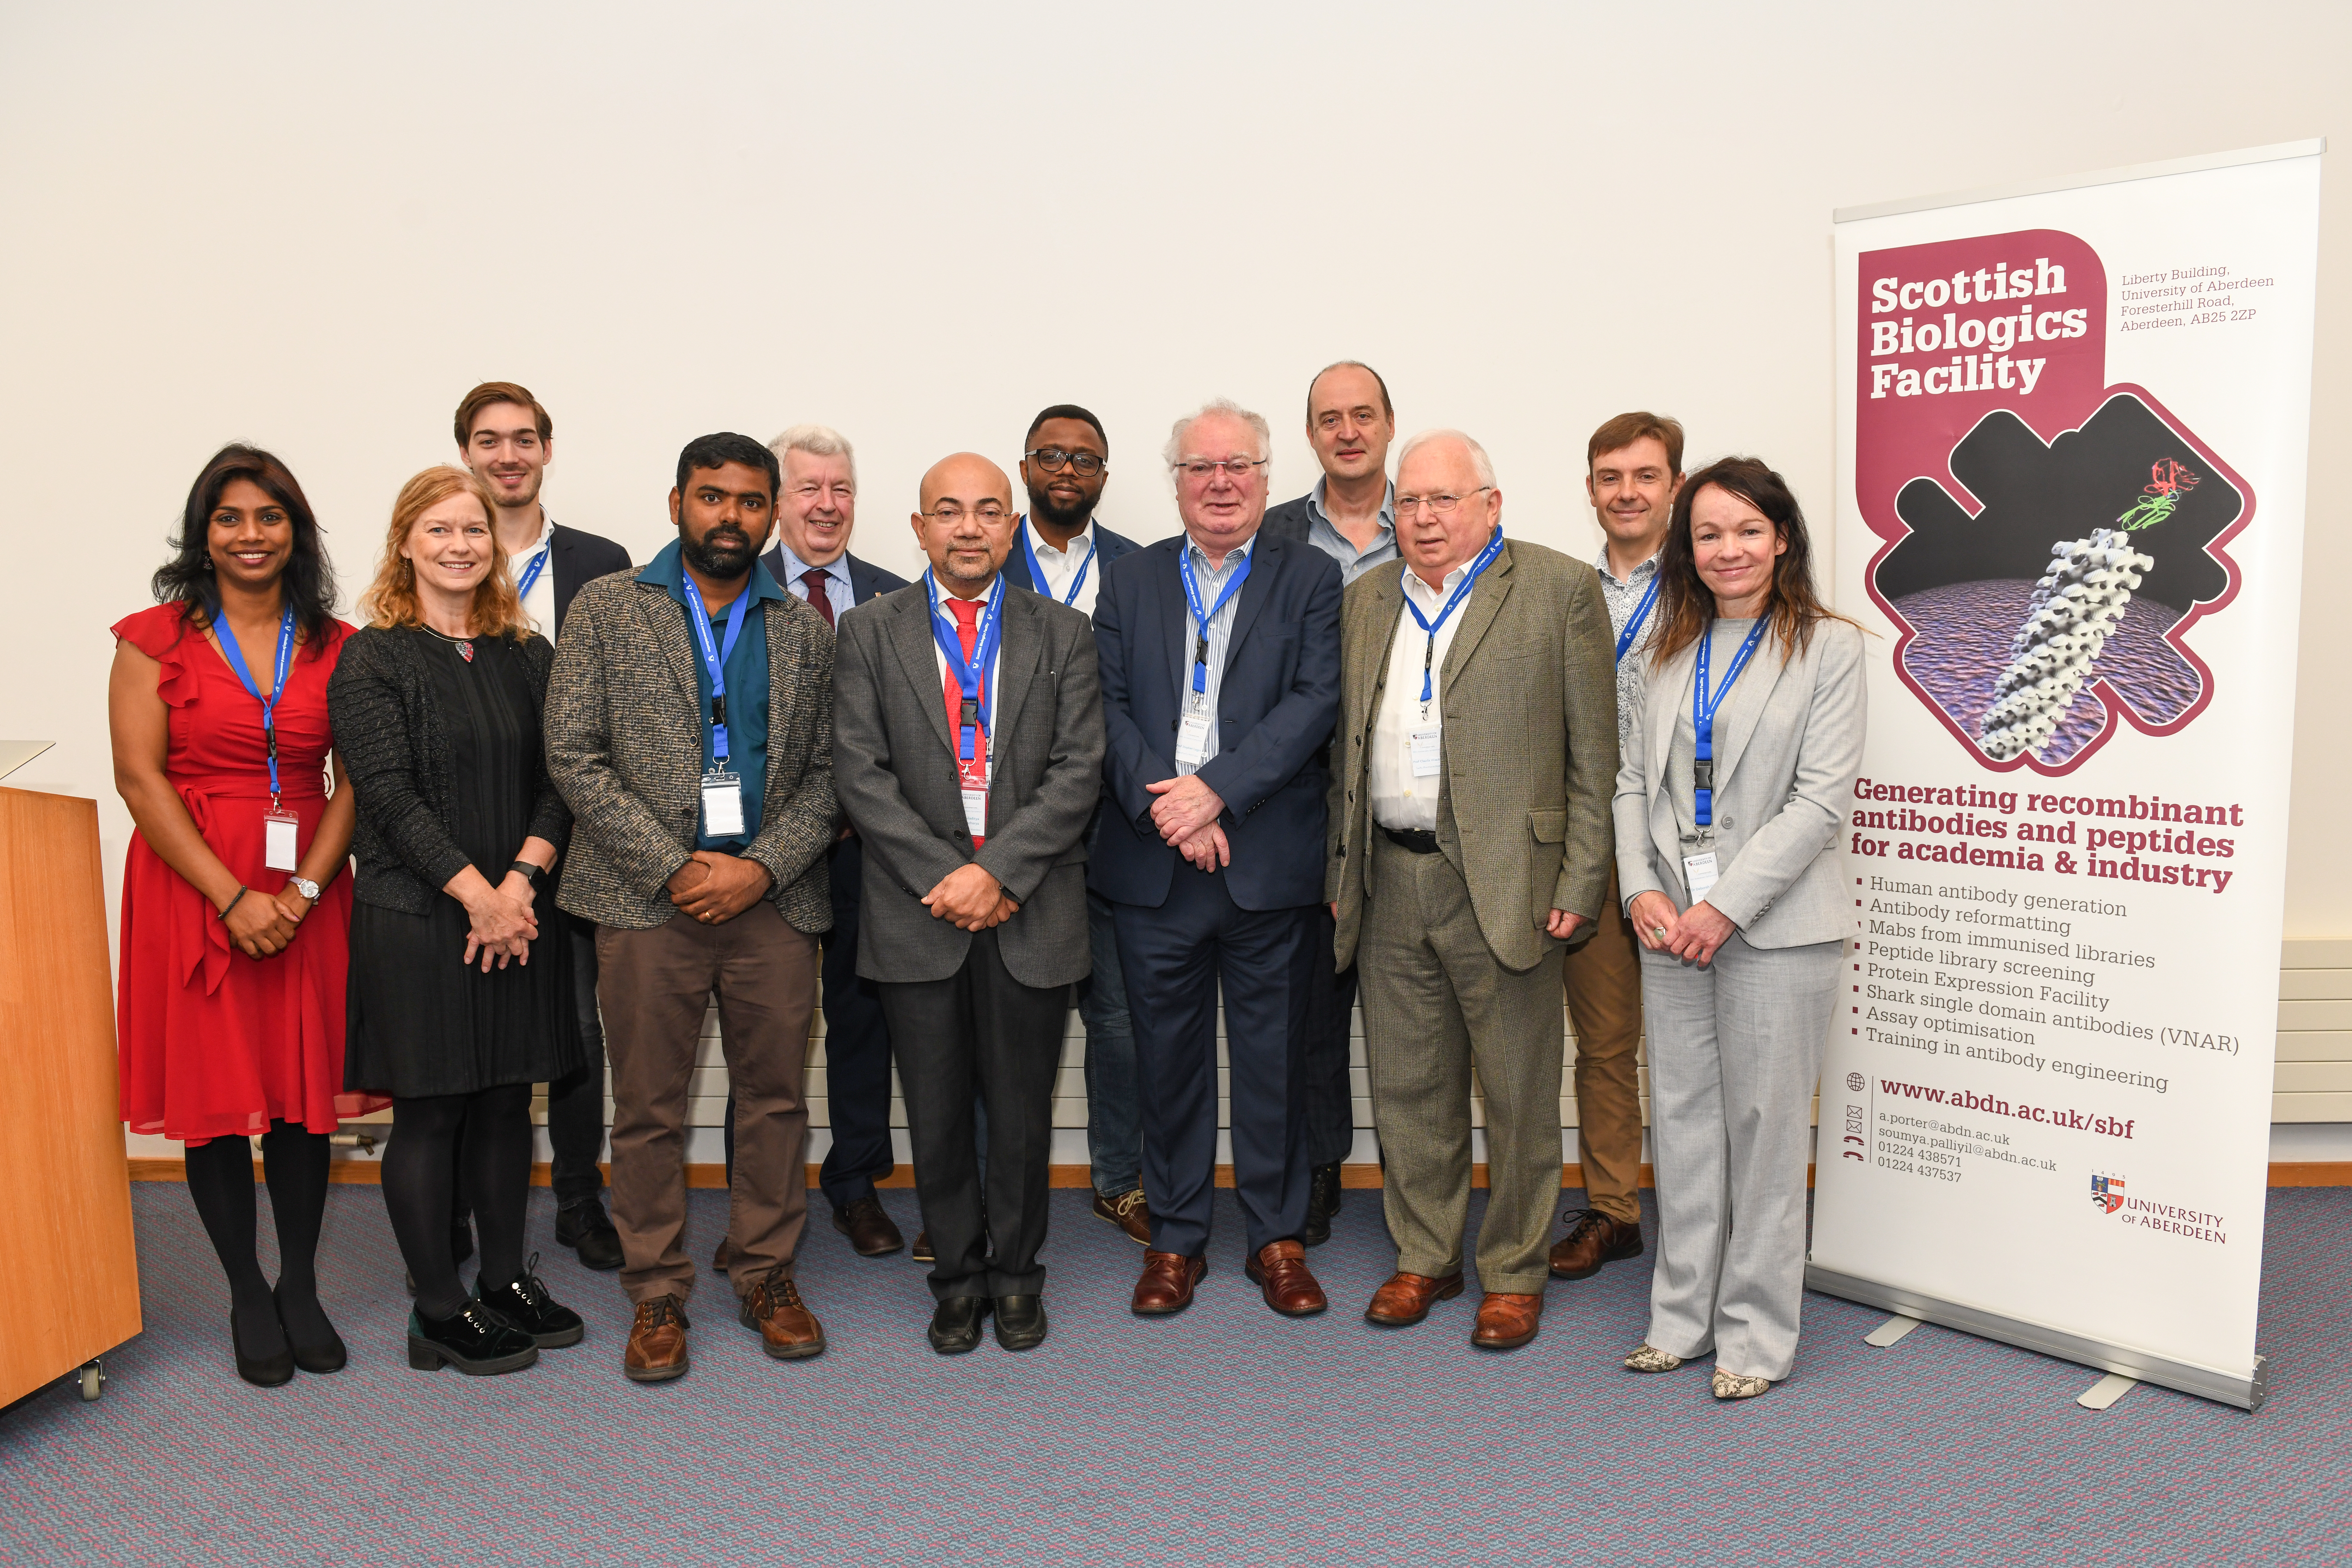 Attendees at the Scottish Biologics Facility 10th anniversary included centre director Professor Andrew Porter, Lewis Macdonald MSP, facility manager Soumya Palliyil and head Aberdeen University School of Medicine, Medical Sciences and Nutrition, Professor Bhattacharya.